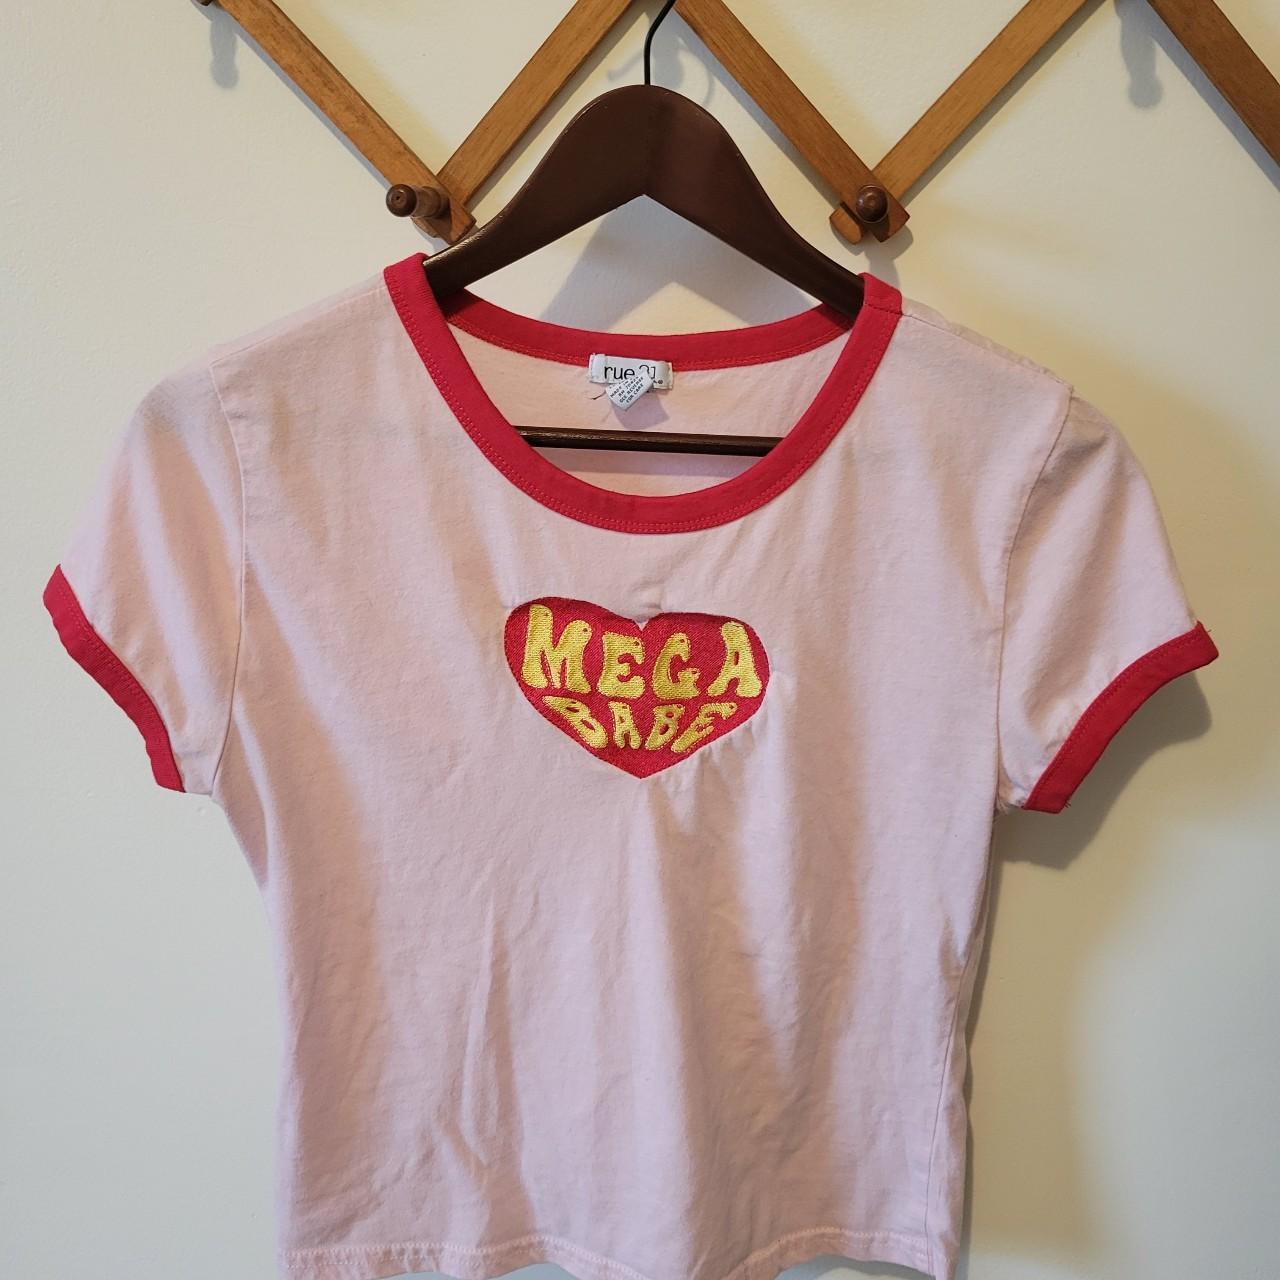 Rue 21 Women's Red and Pink T-shirt (2)